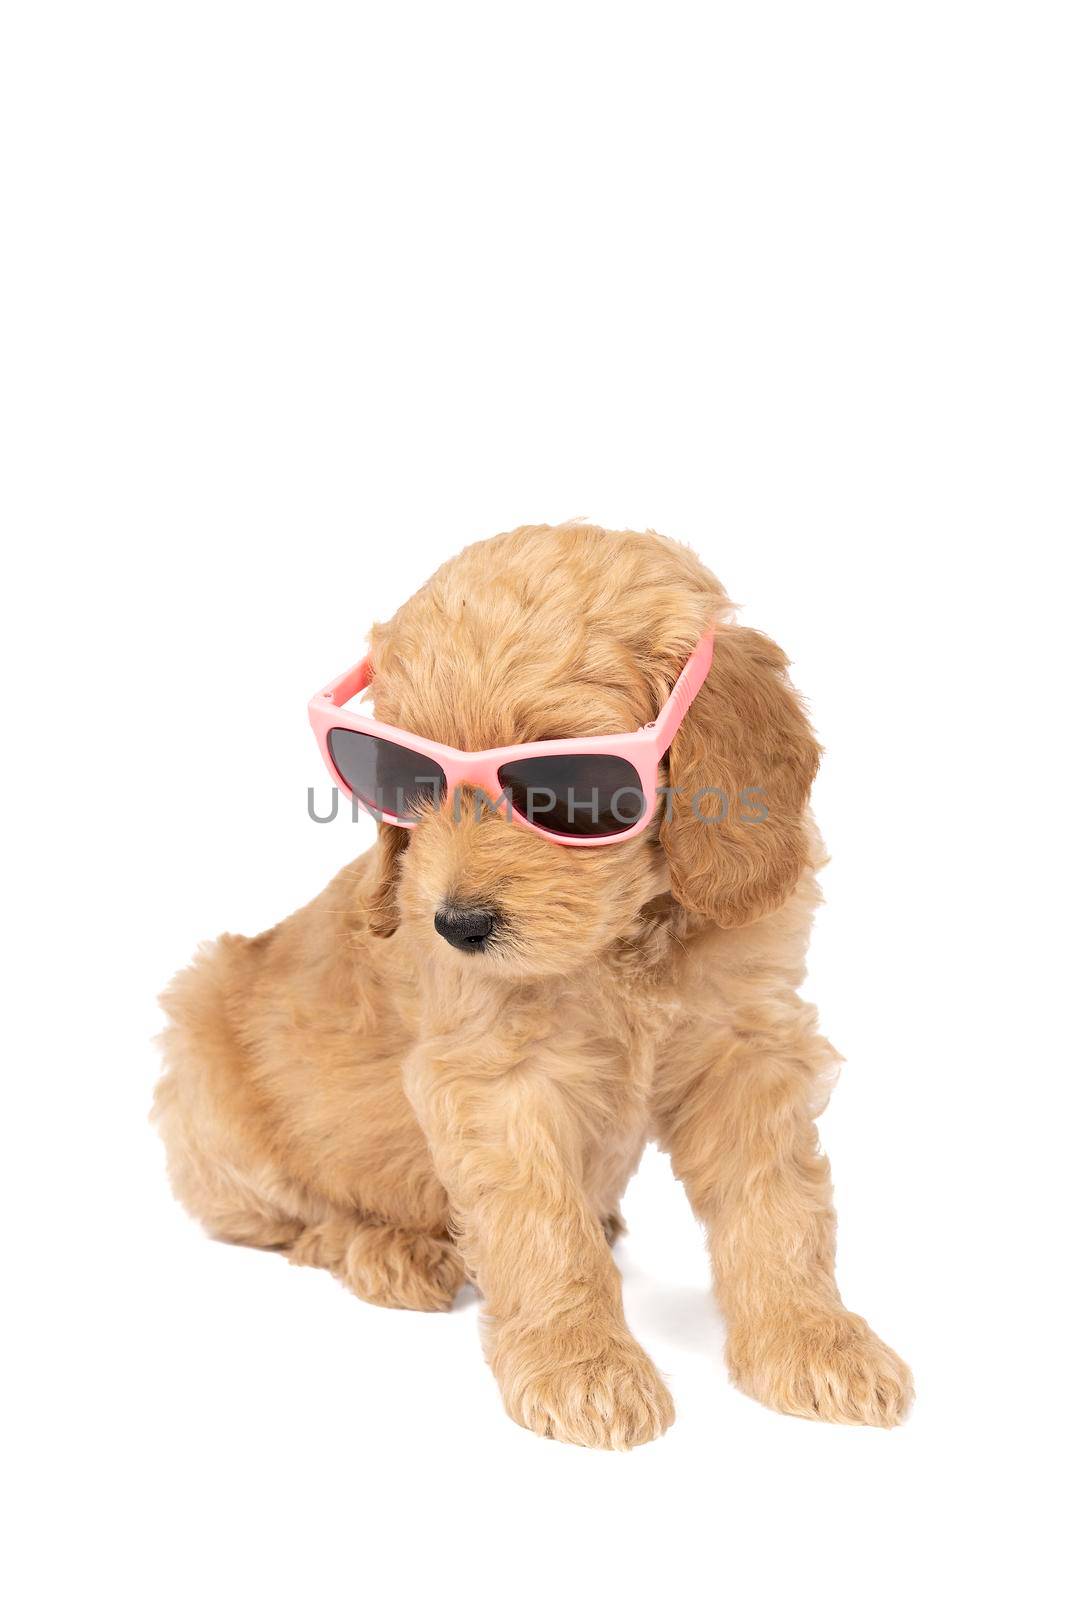 A cute labradoodle puppy sitting looking at the camera wearing pink sunglasses isolated on a white background with space for text